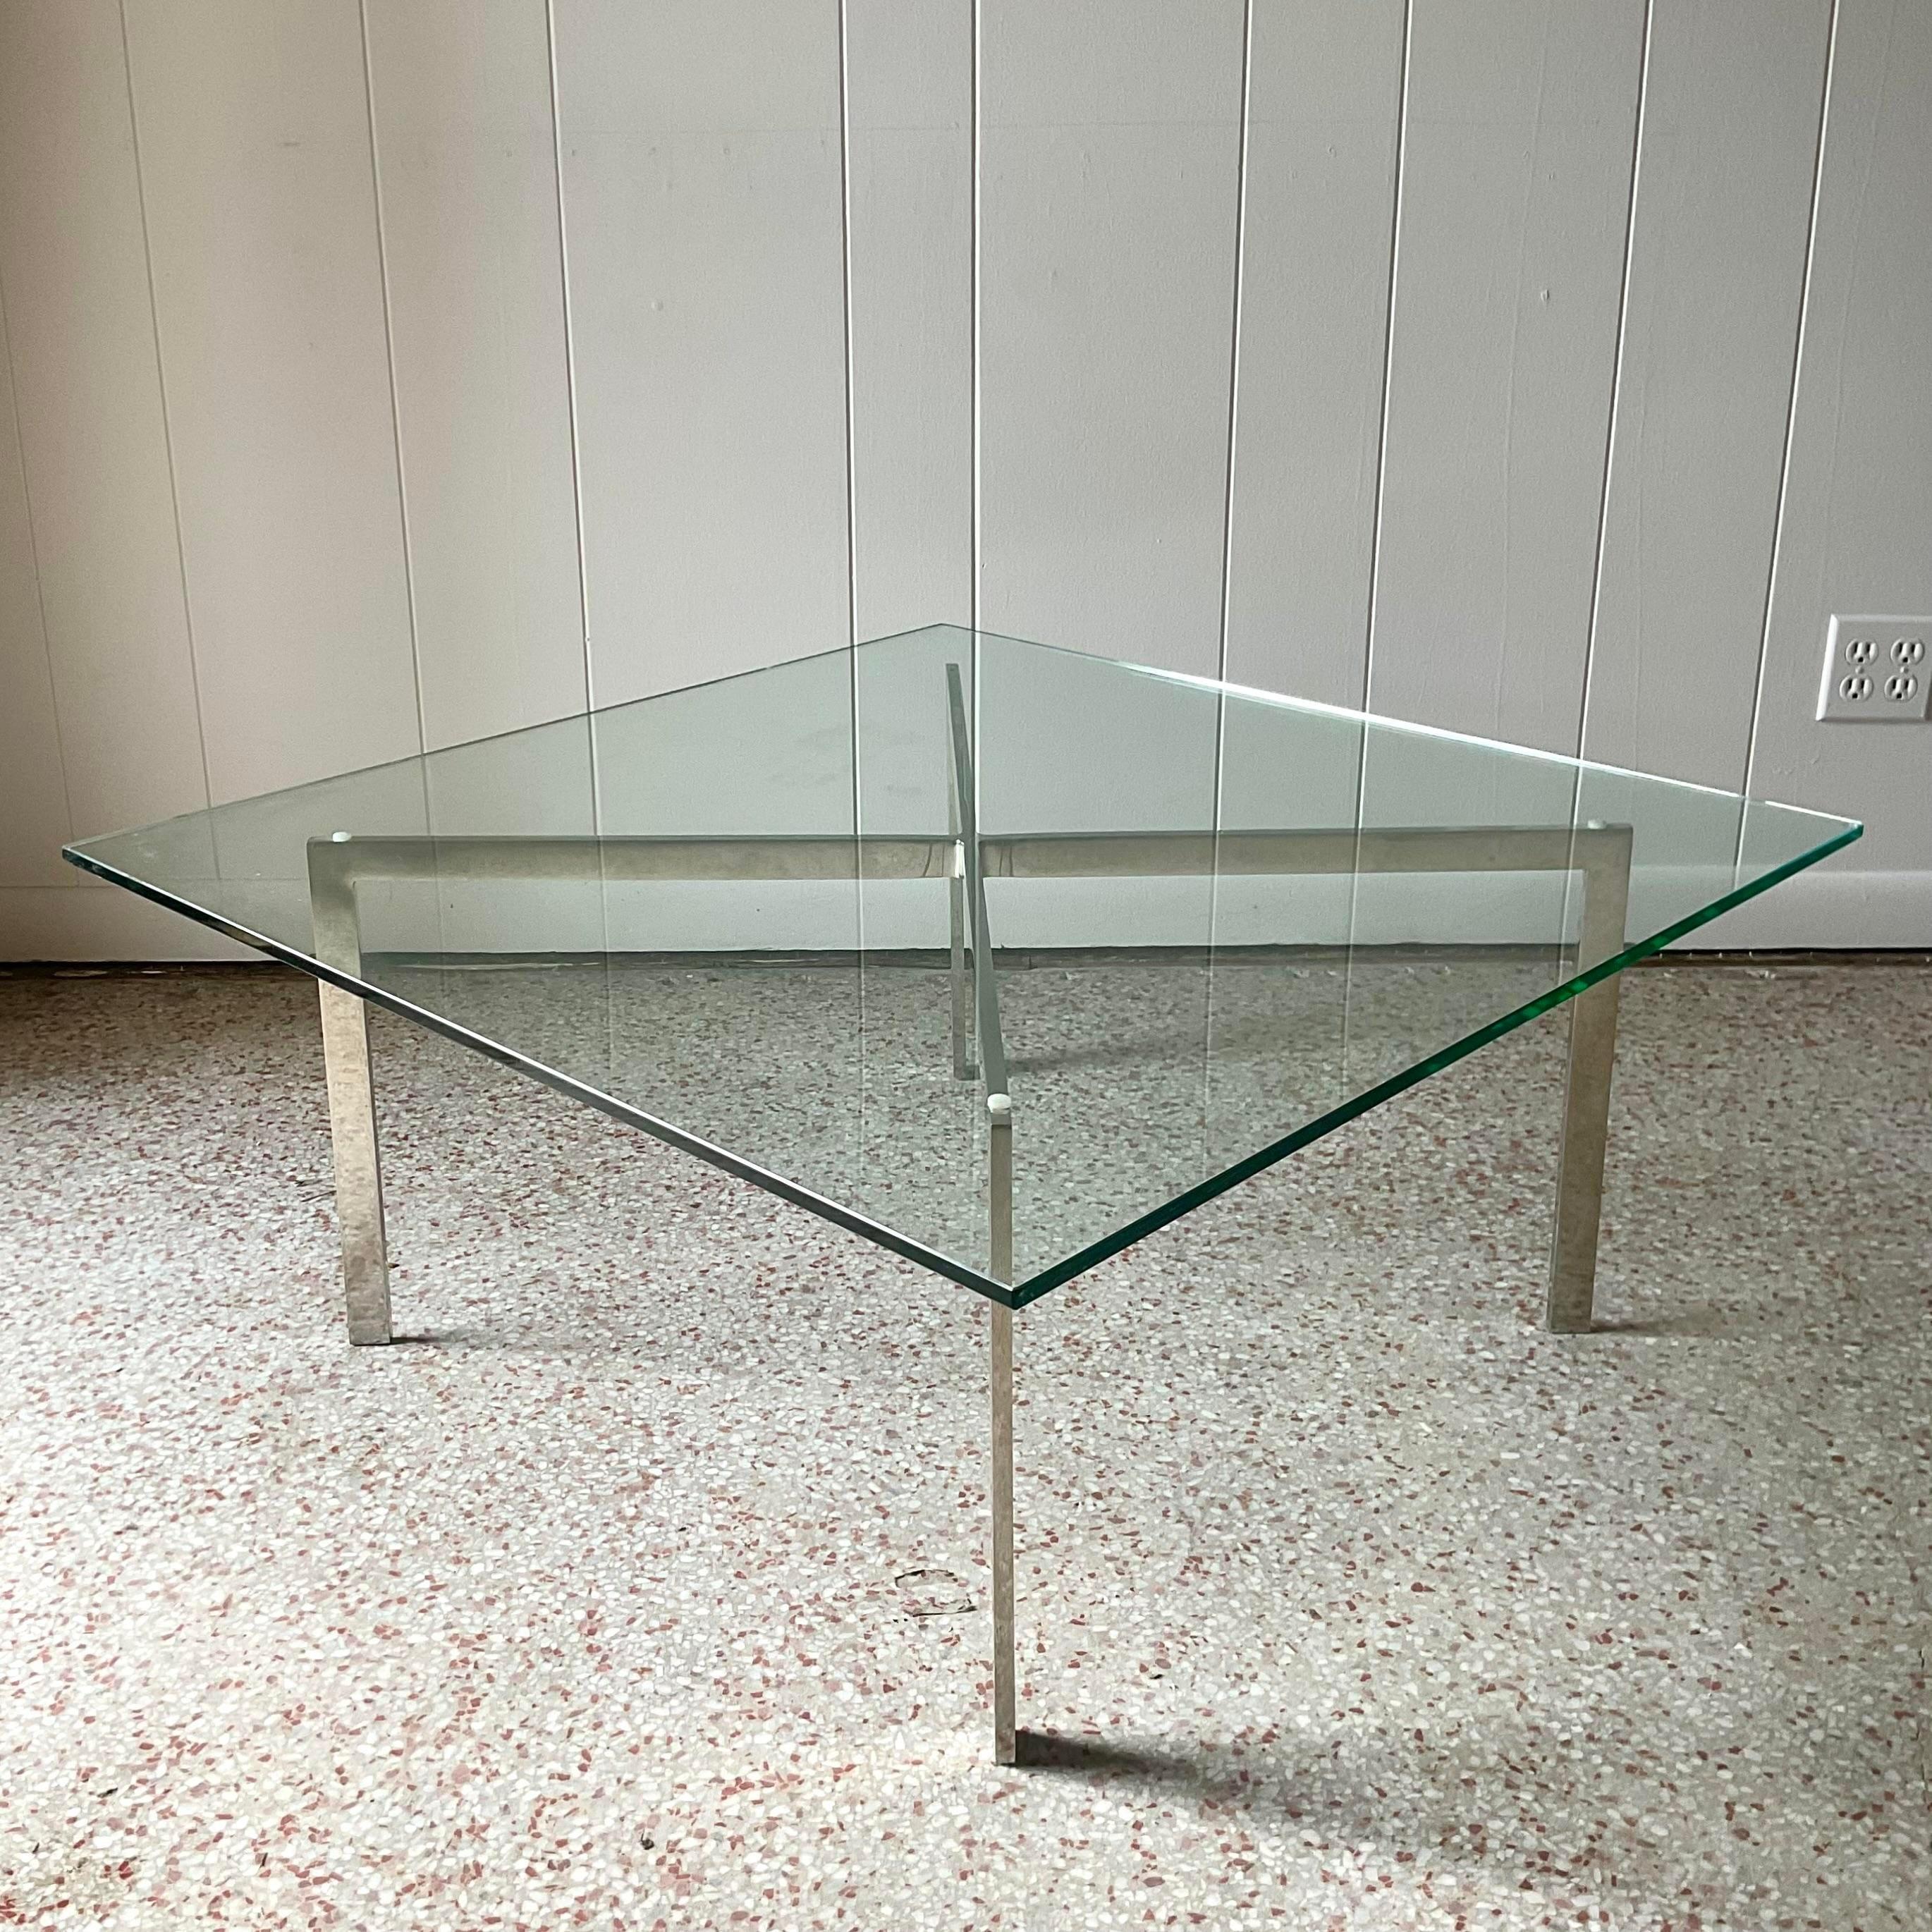 A fabulous vintage Contemporary coffee table. The iconic “Barcelona” table designed by Milo Baughman for Knoll studios. Signed on the leg interior. Acquired from a Palm Beach estate.